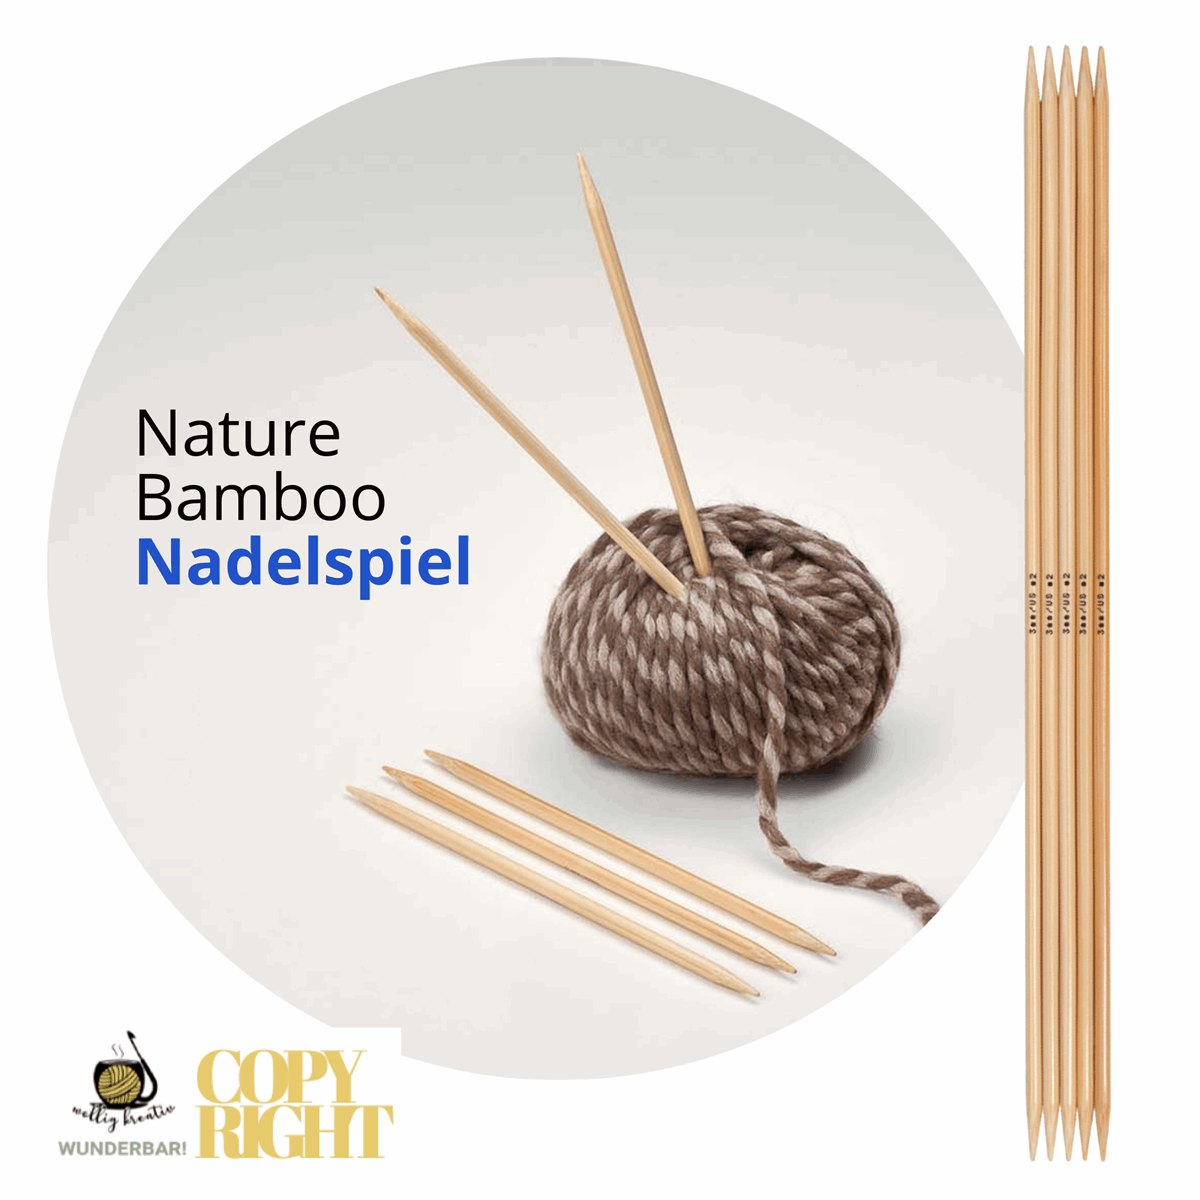 Addi, Nature Bamboo double pointed needles, 65012, size 7 length 20 cm